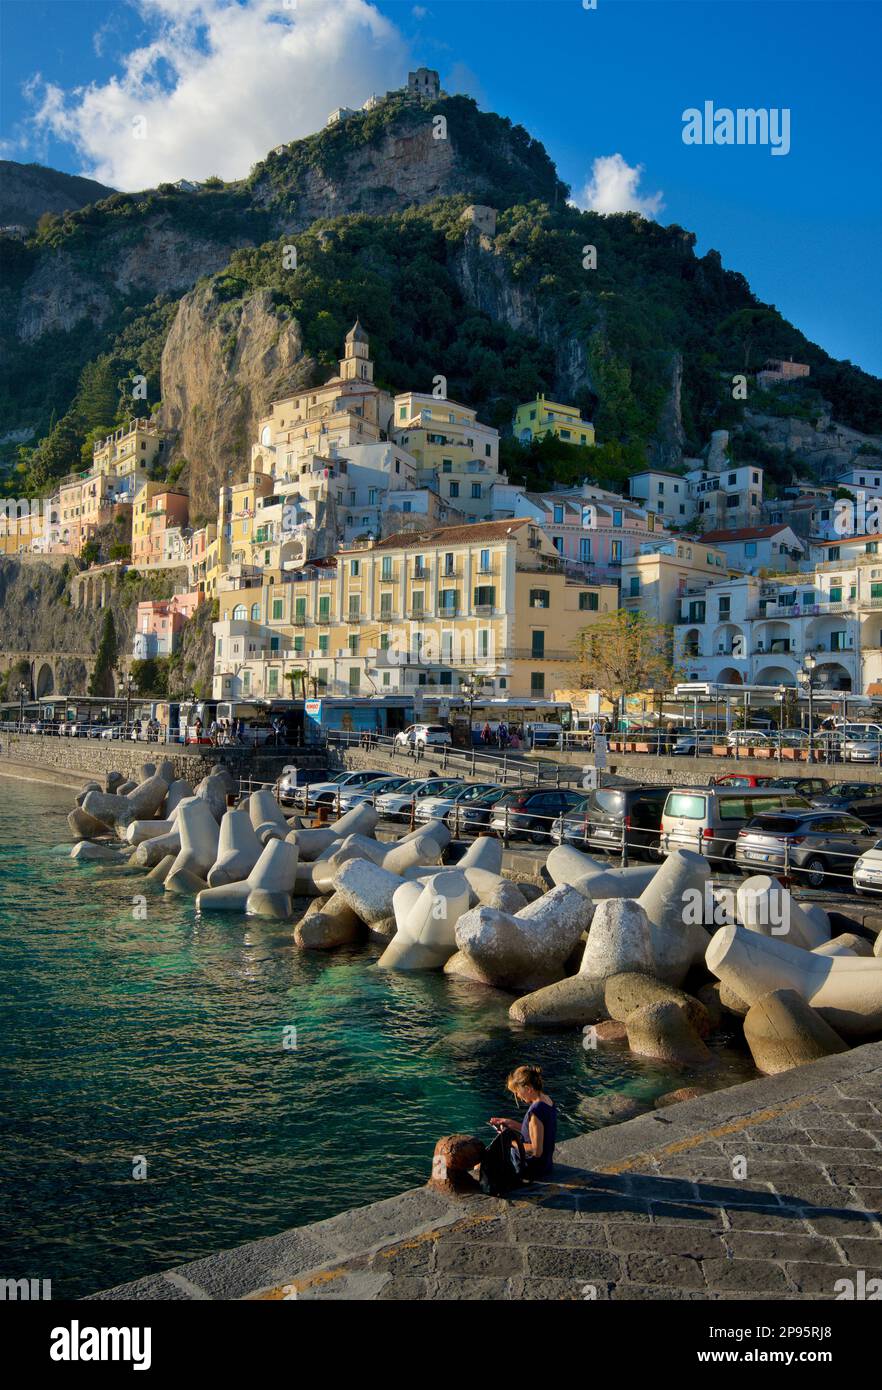 Person sitting on the main jetty at Amalfi, Salerno, Italy  with the town rising, clinging to the hillside. Amalfi Coast. Tyrrhenian Sea. Stock Photo